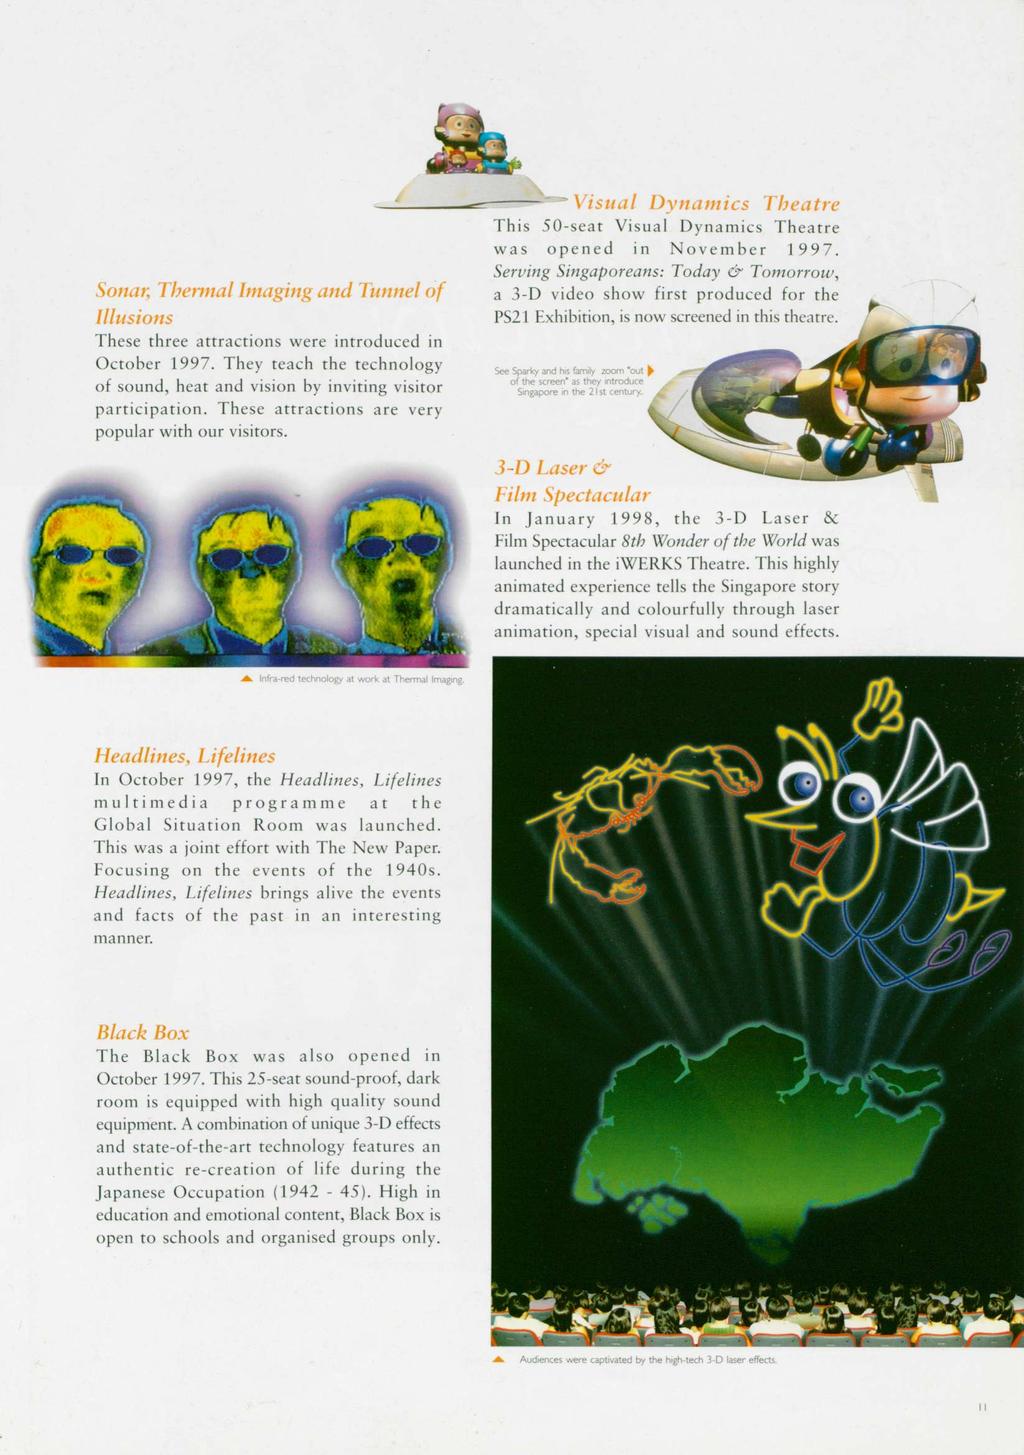 r Sonar, Thermal Imaging and Tunnel of Illusions These three attractions were introduced in October 1997. They teach the technology of sound, heat and vision by inviting visitor participation.